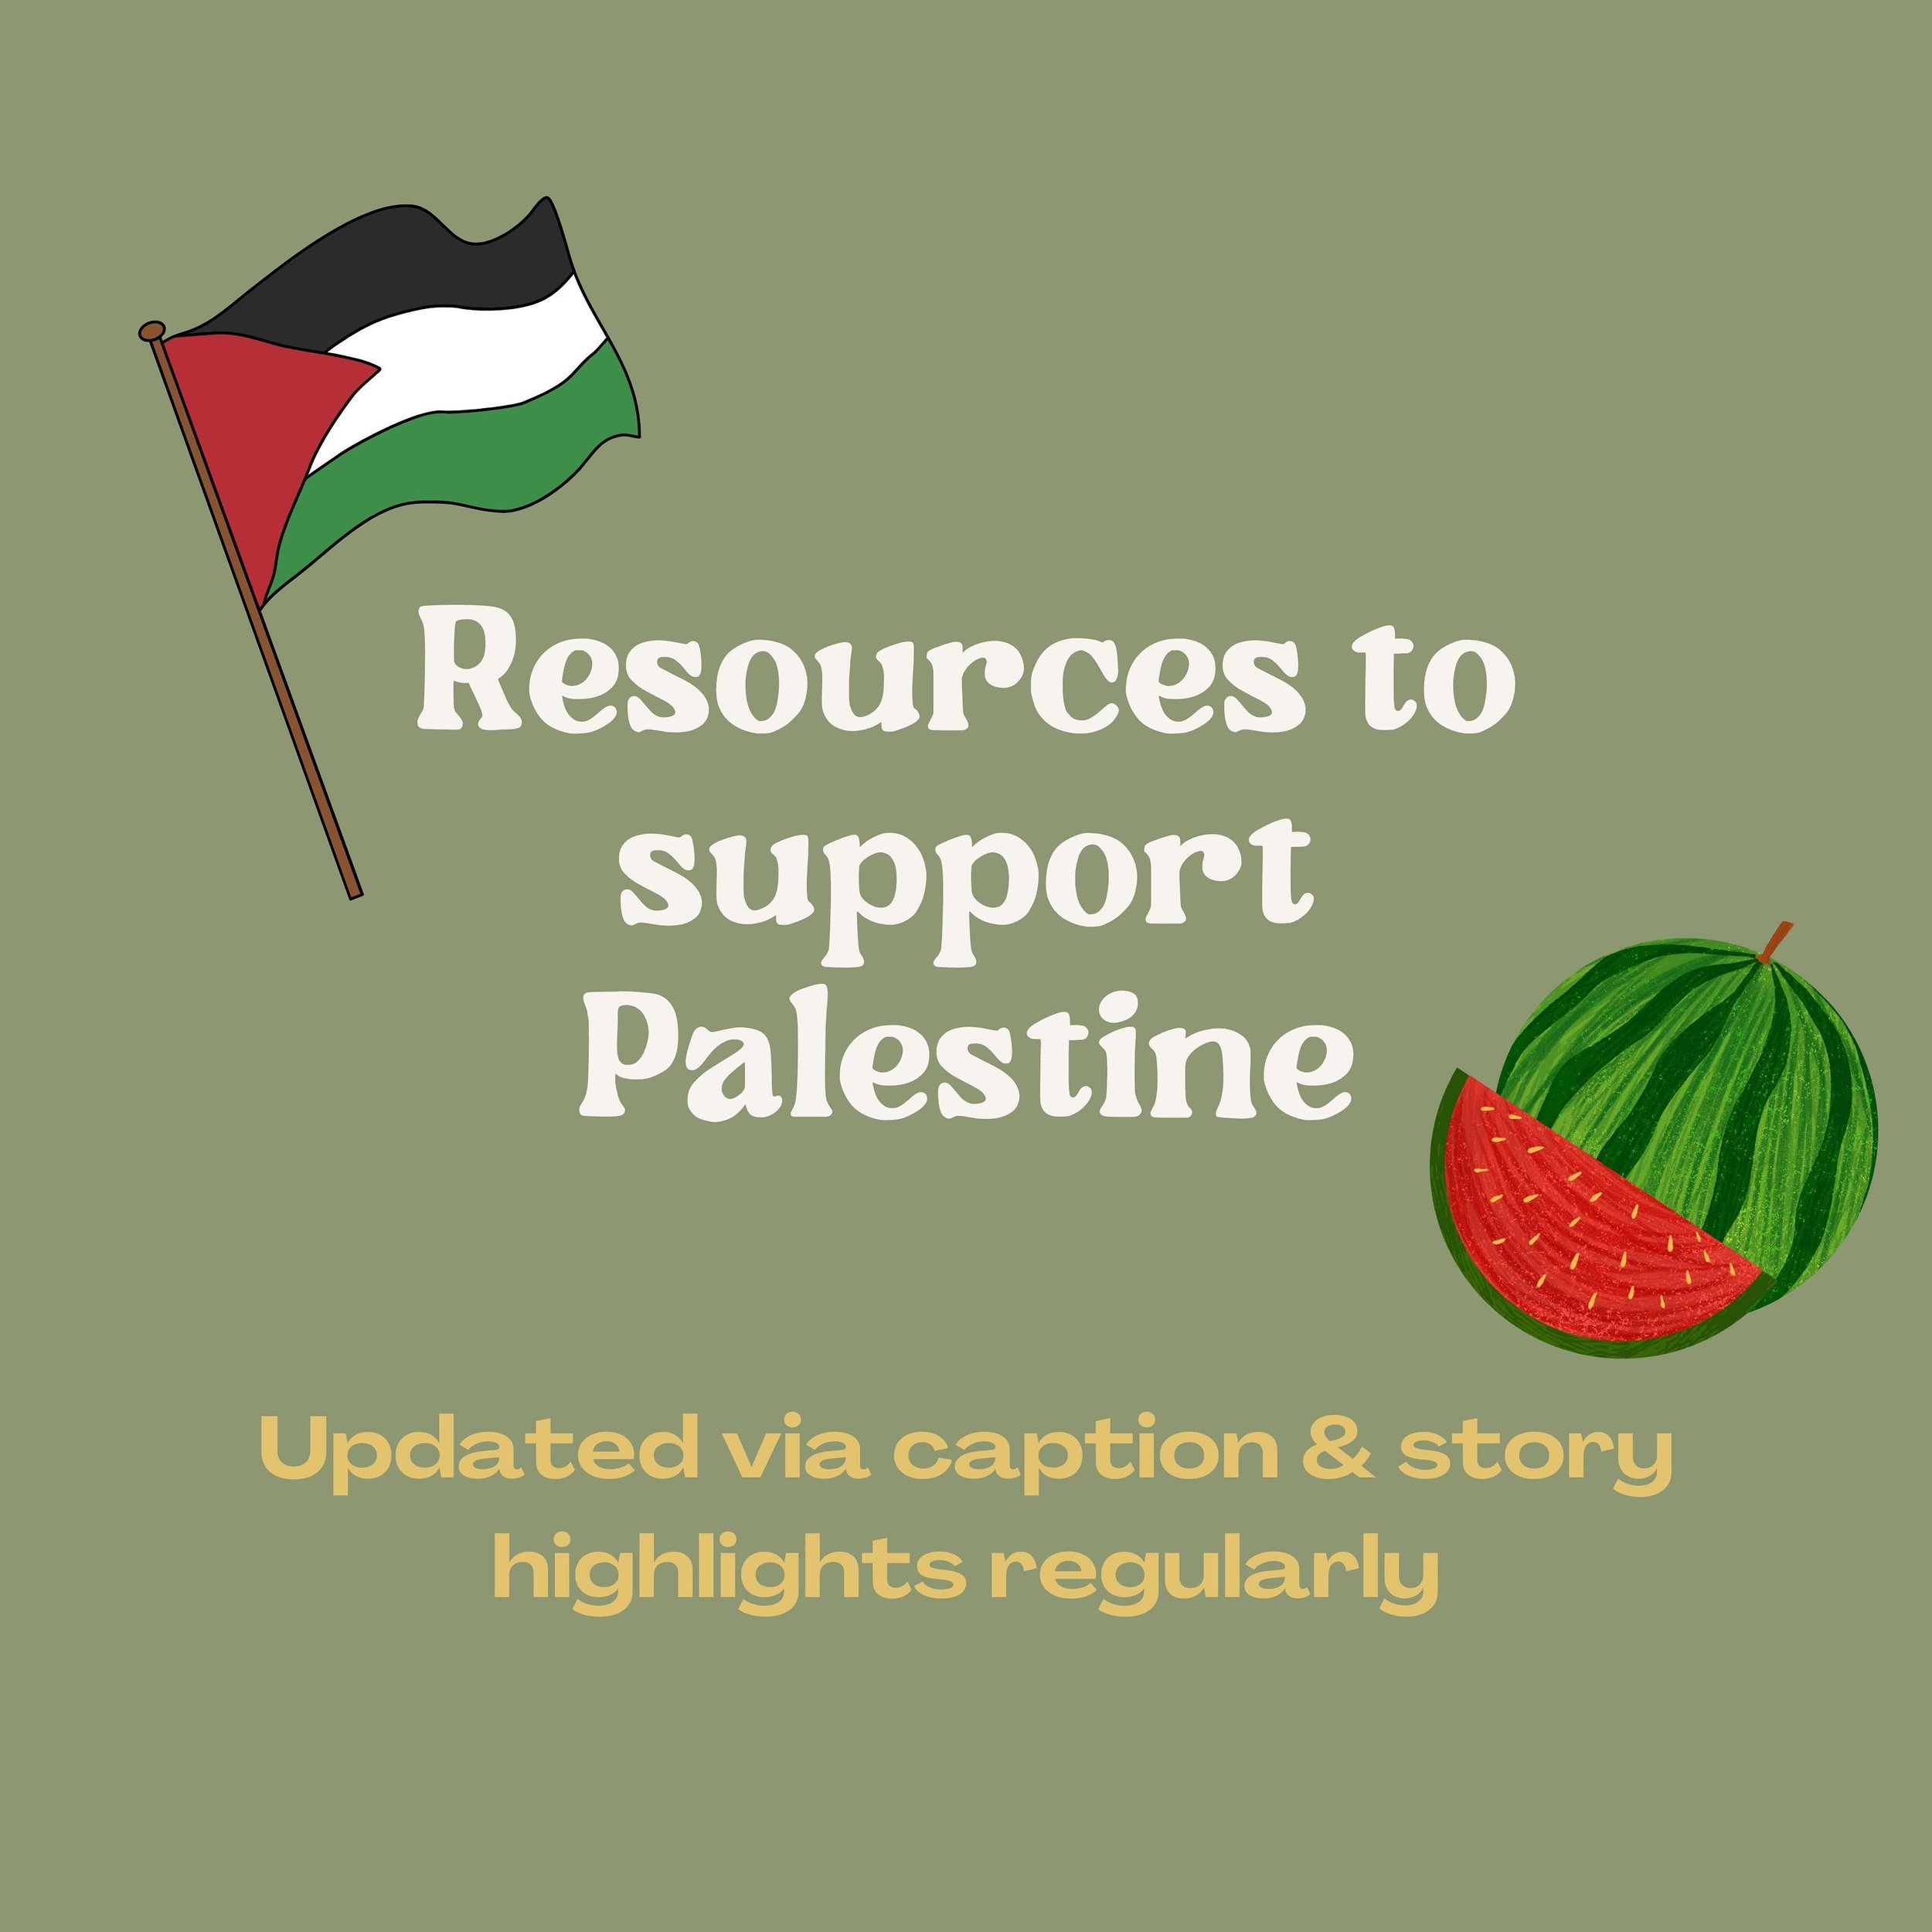 Palestine needs us more than ever.

Are you looking to get involved but not sure where to start? I&rsquo;ve compiled a story highlight with accounts to follow &amp; actions to take that I will be keeping updated regularly. A few key points to take in